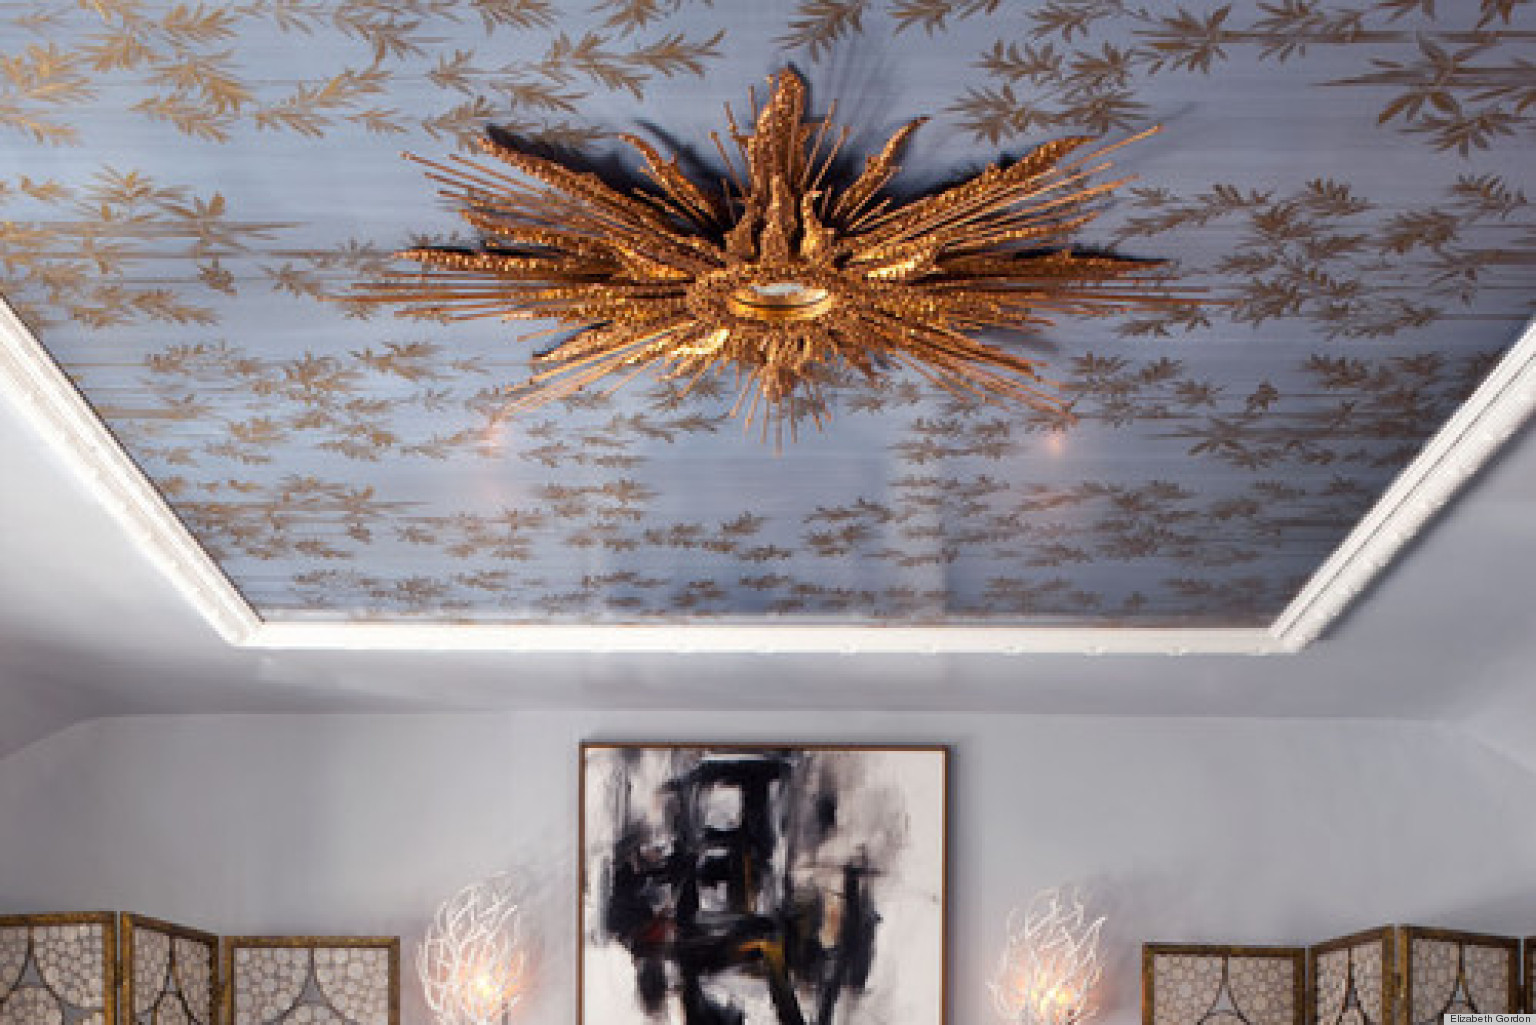 Silver Leaf Ceilings That Inspire Decadence (PHOTOS) | HuffPost